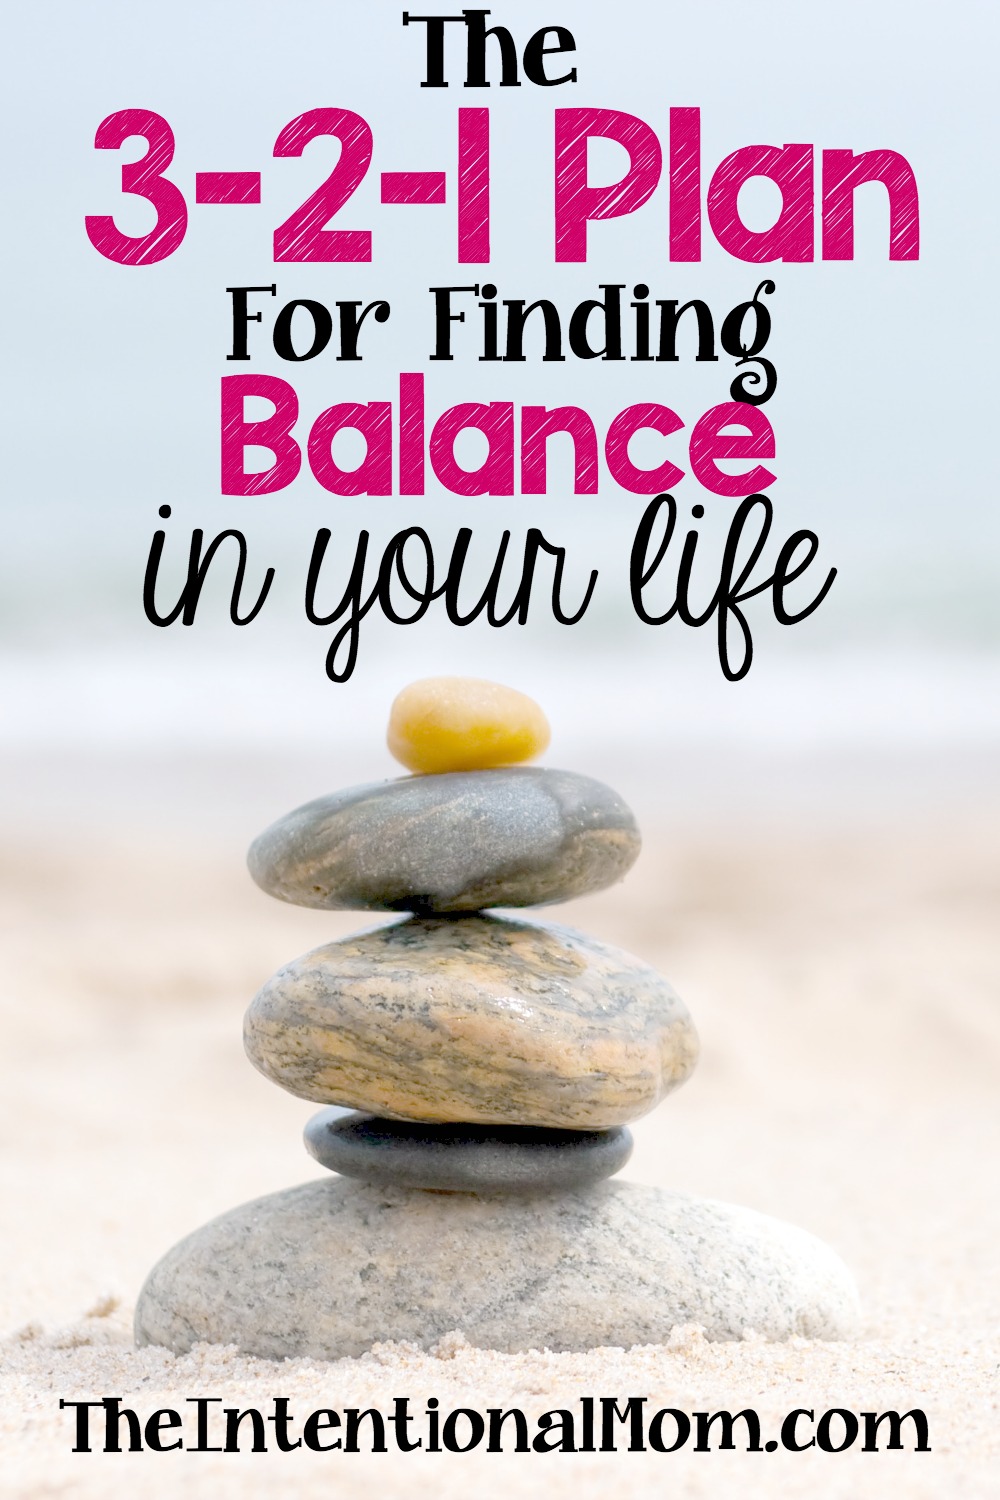 The 3-2-1 Plan For Finding Balance in Your Life